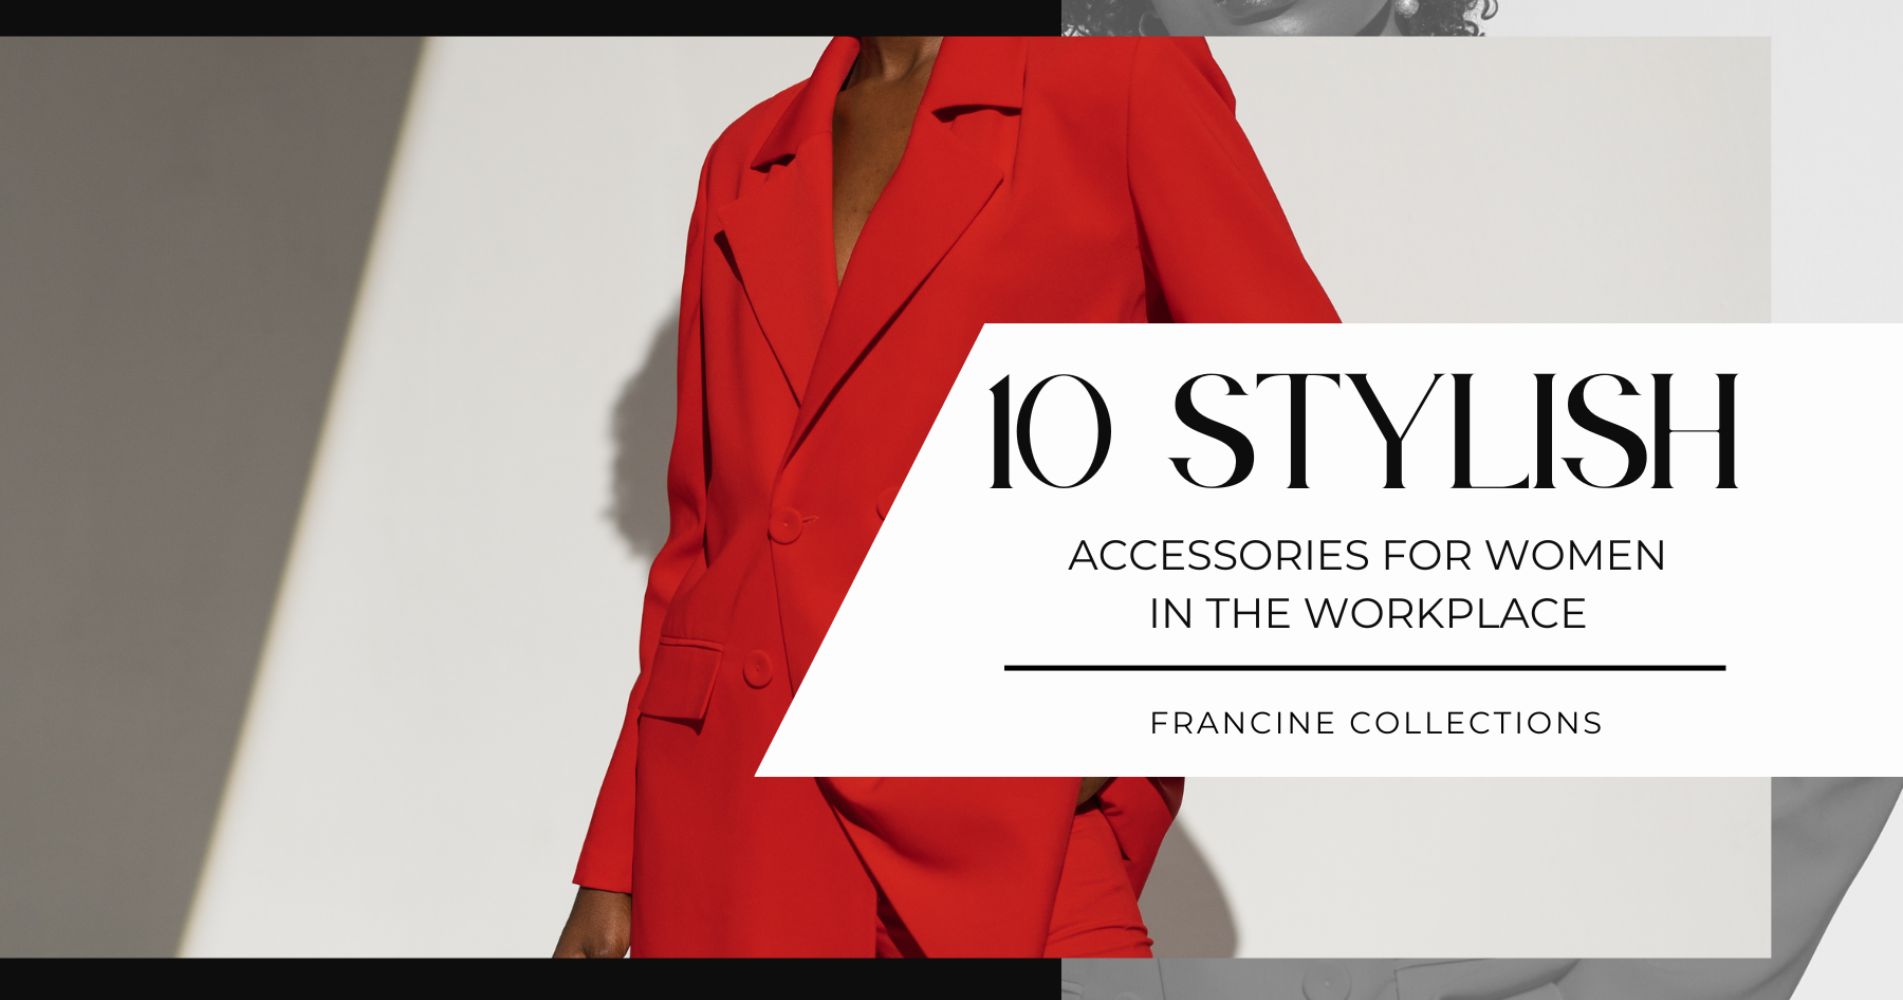 10 Stylish Accessories for Women in the Workplace